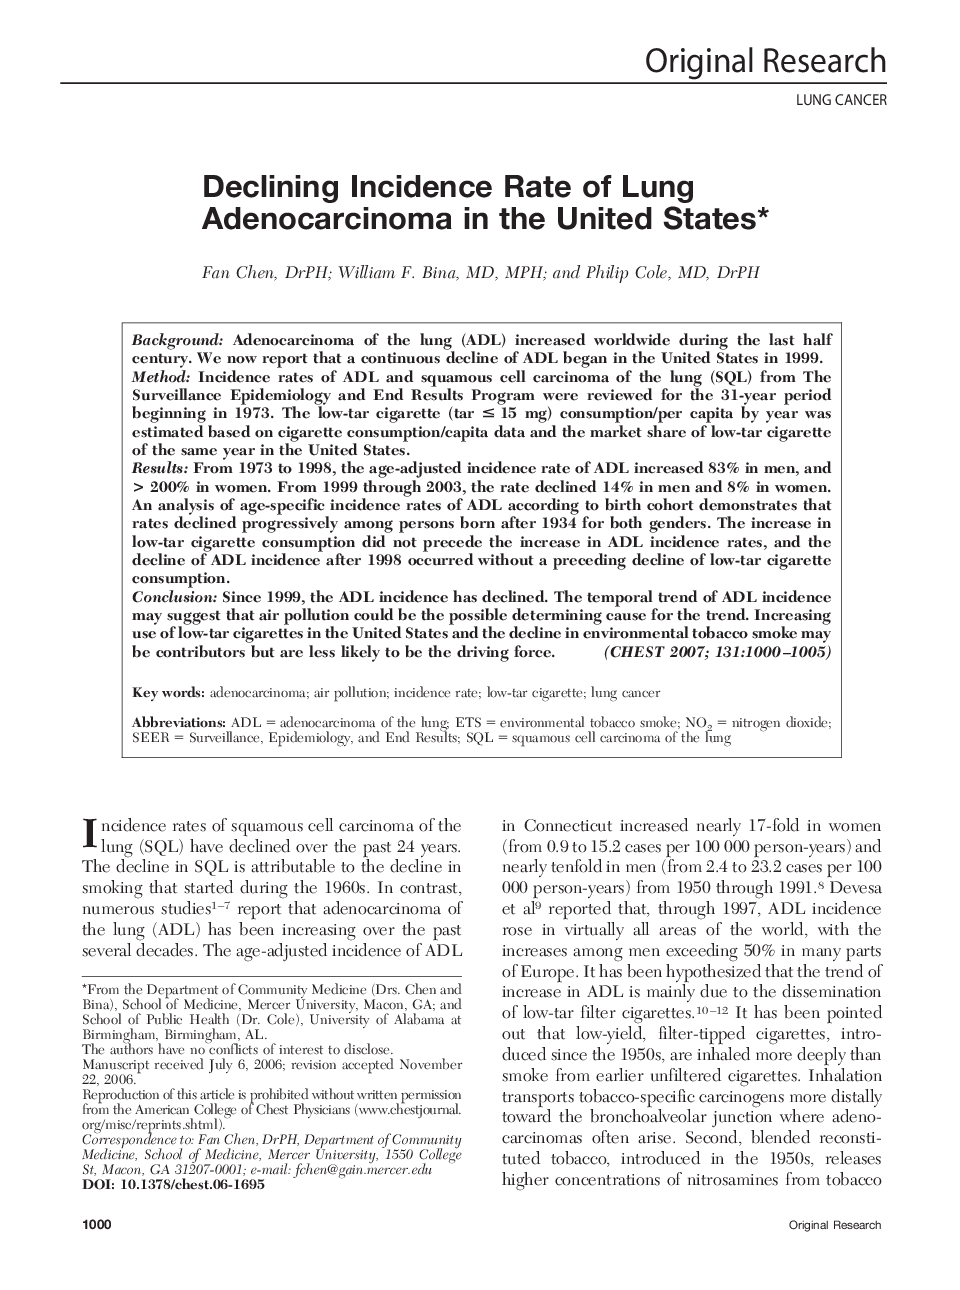 Declining Incidence Rate of Lung Adenocarcinoma in the United States 